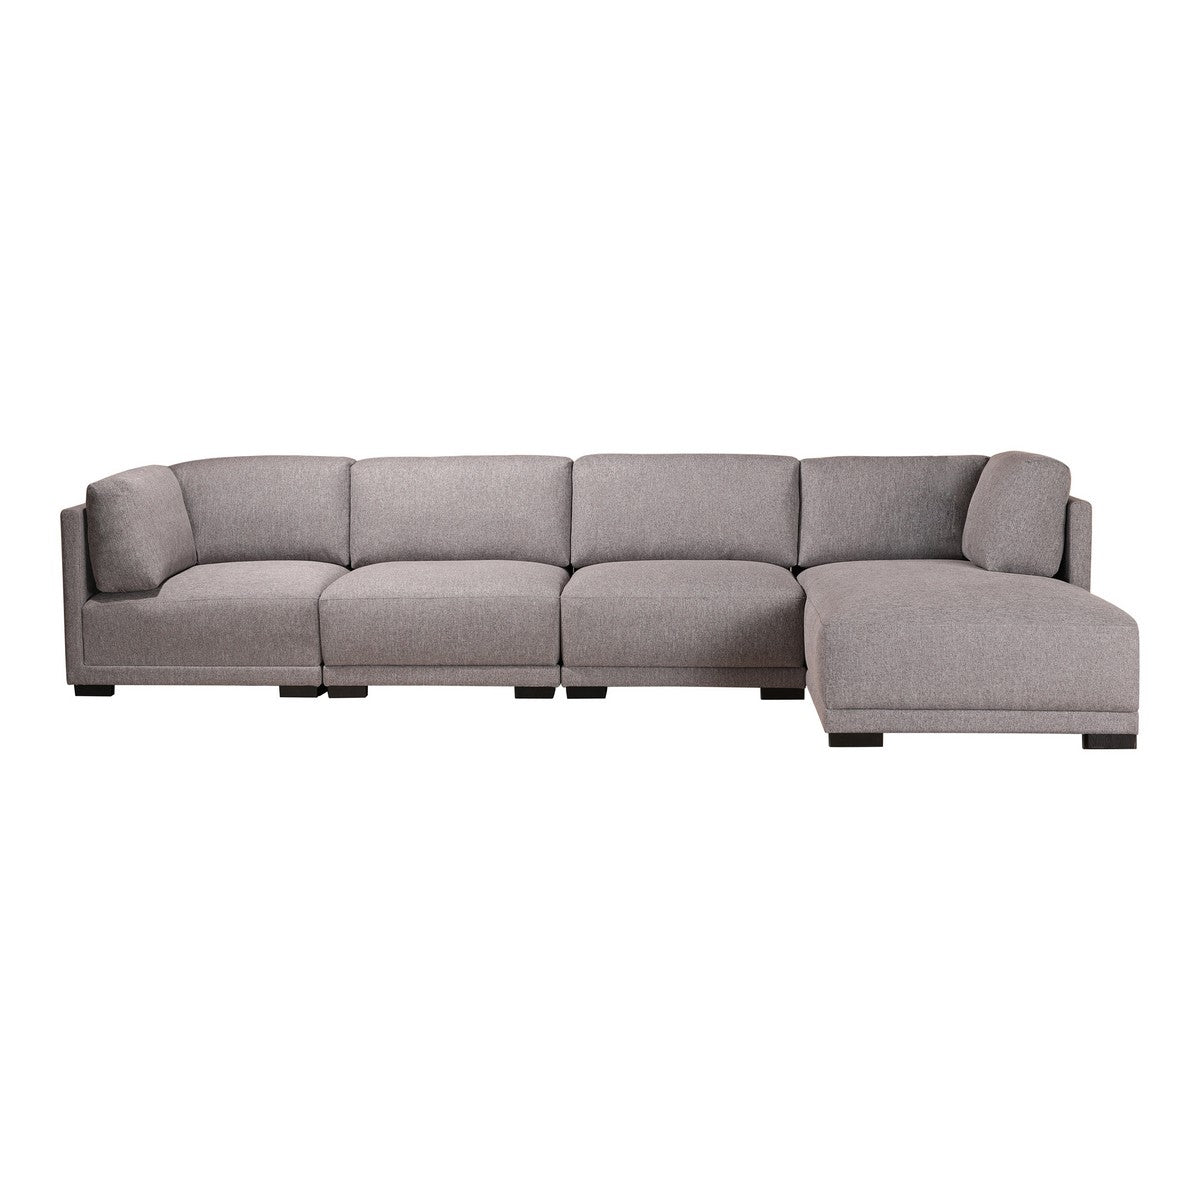 Moe's Home Collection Romeo Modular Sectional Right Grey - RN-1120-29 - Moe's Home Collection - Extras - Minimal And Modern - 1